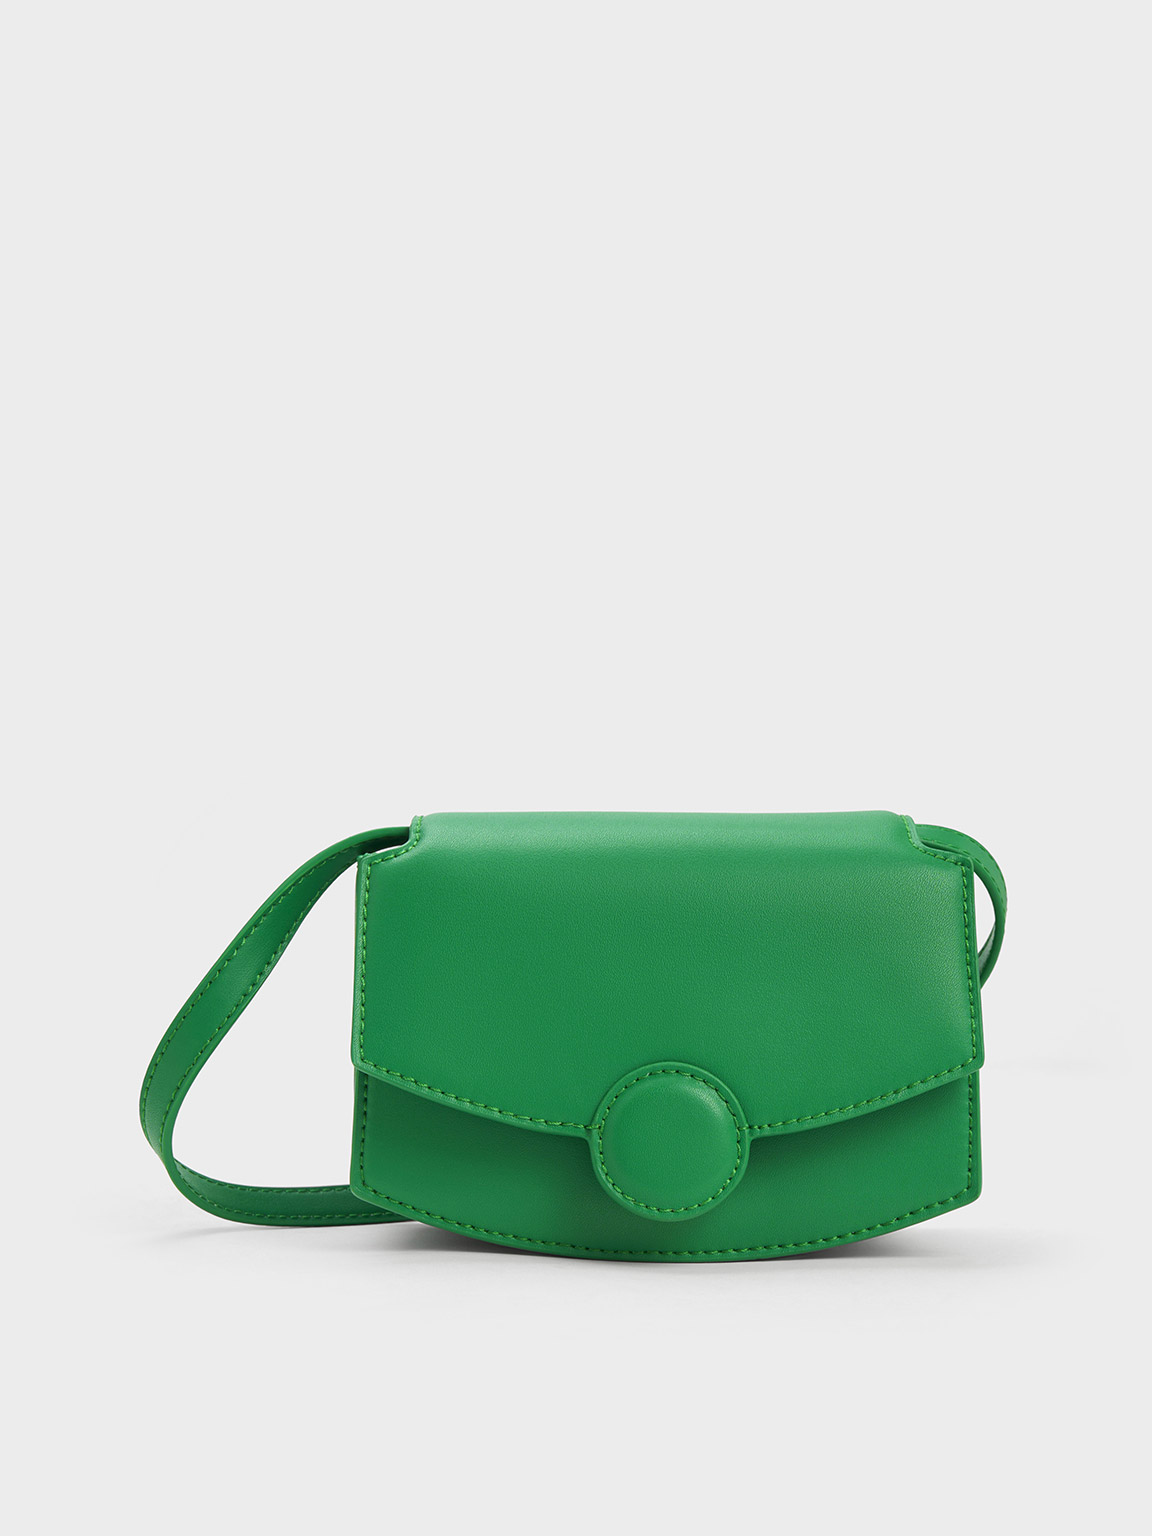 Charles & Keith Clover Curved Shoulder Bag In Green